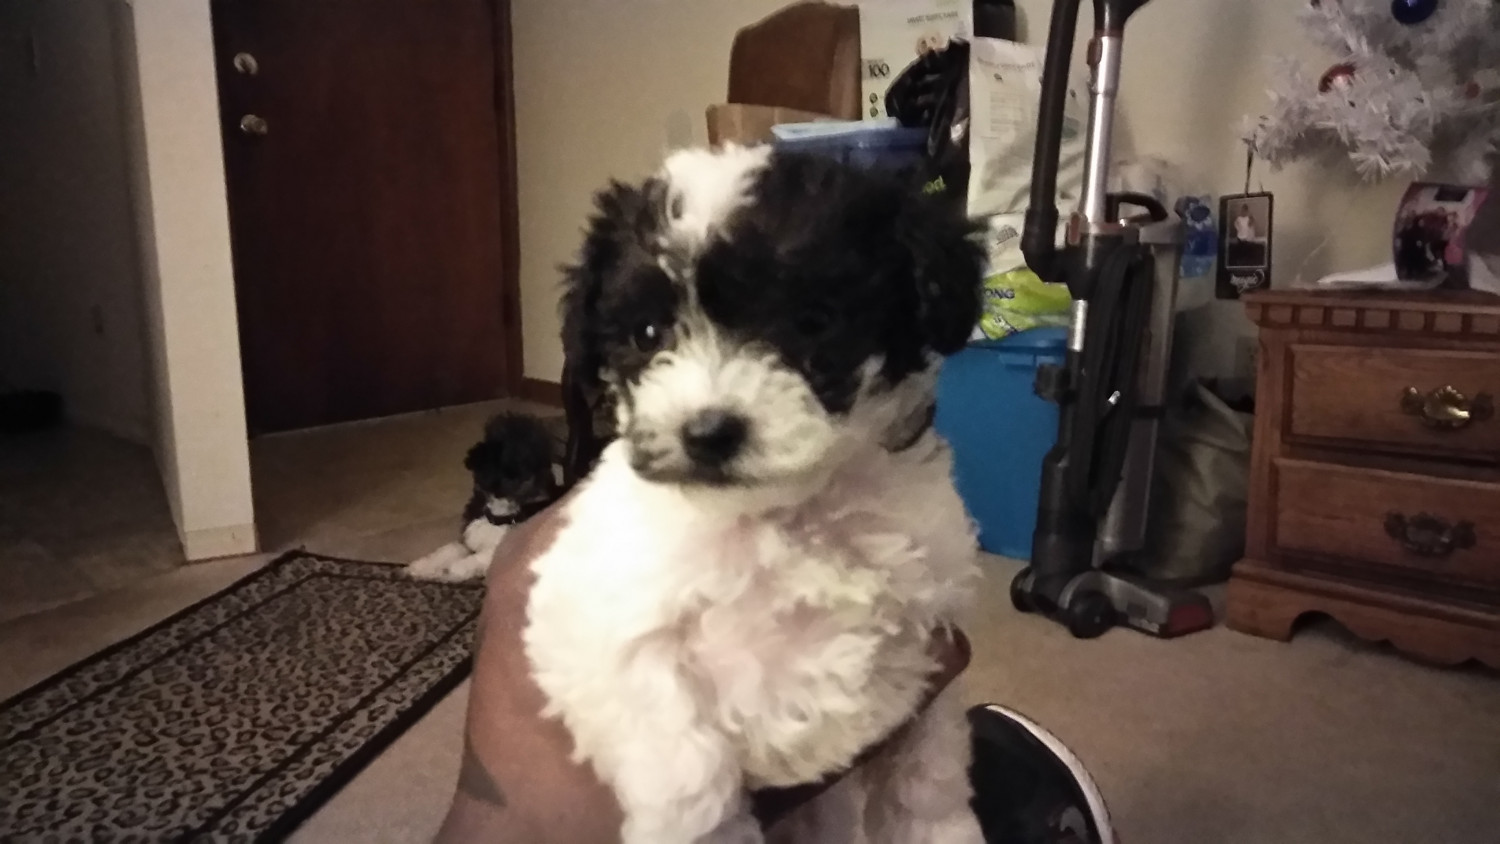 "Poodle" Puppies For Sale | Portland, OR #263917 | Petzlover